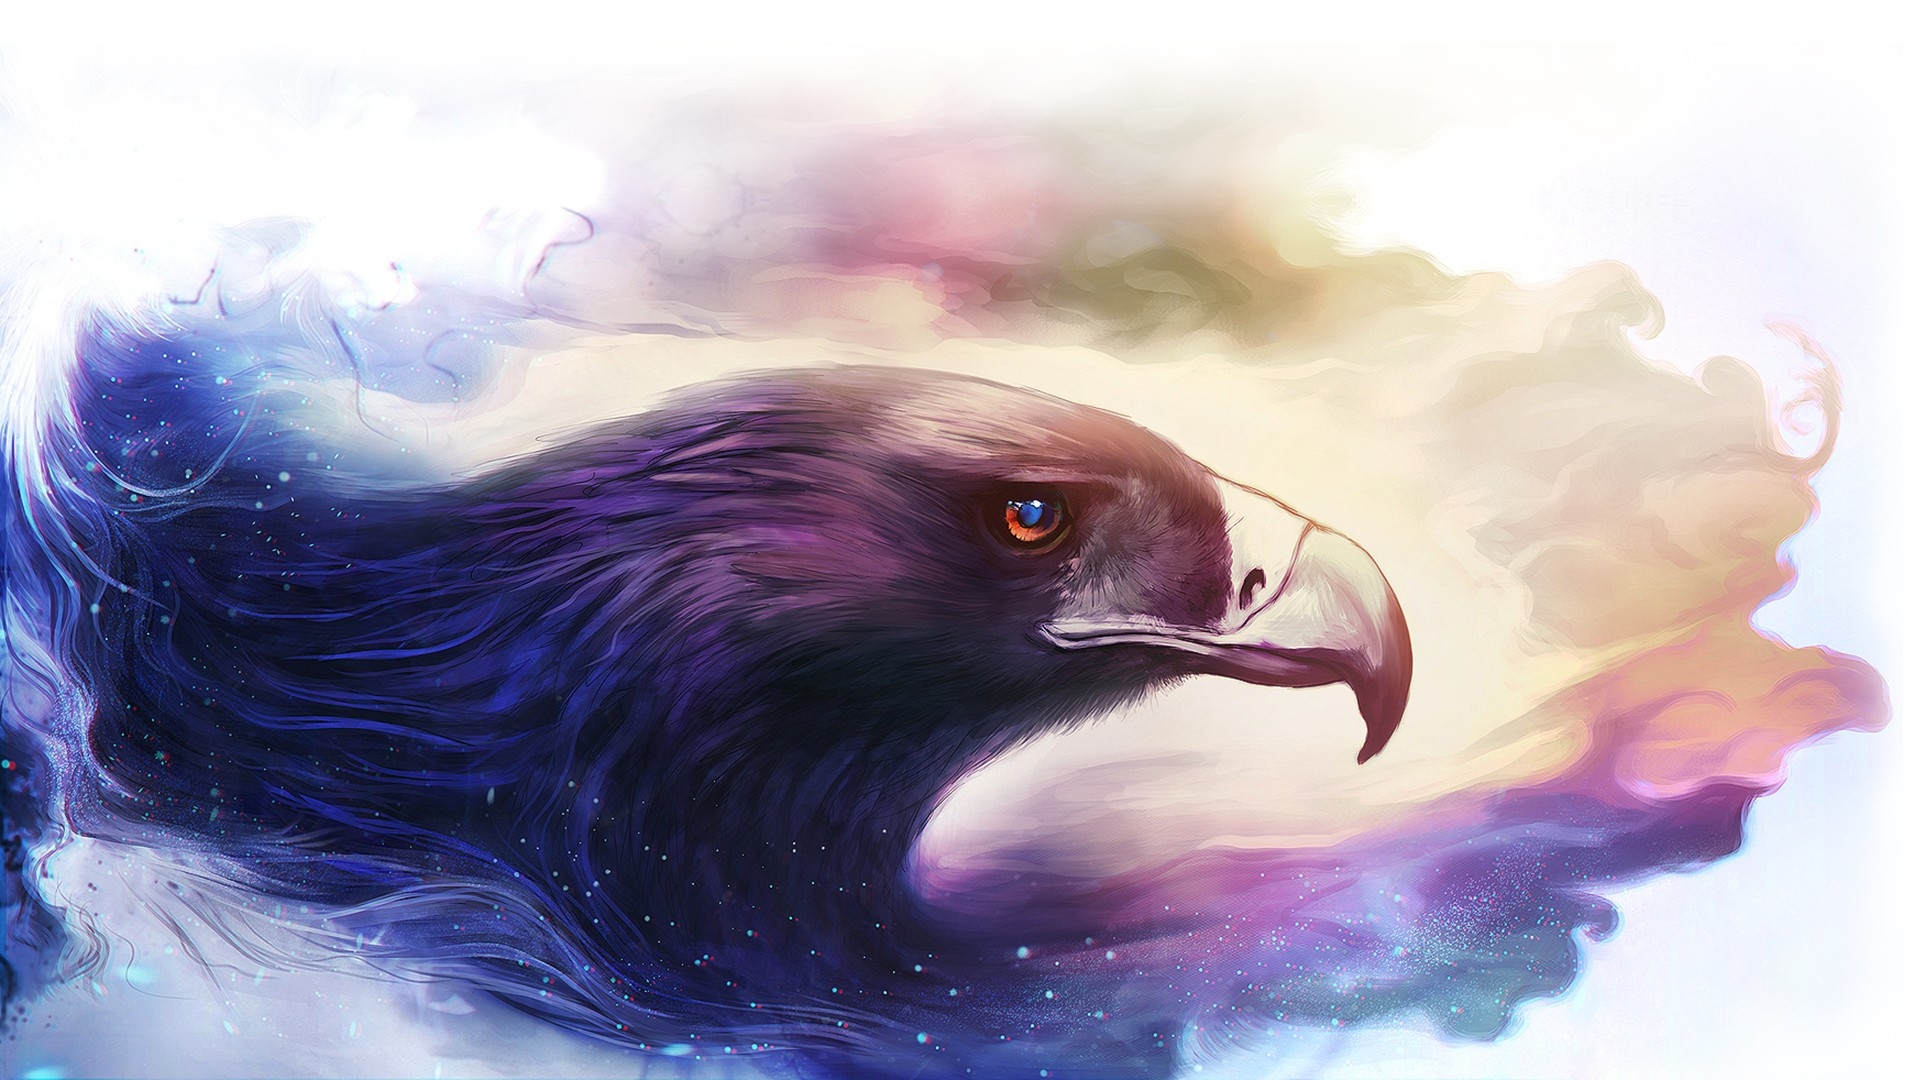 Wallpapers wallpaper eagle painting figure on the desktop